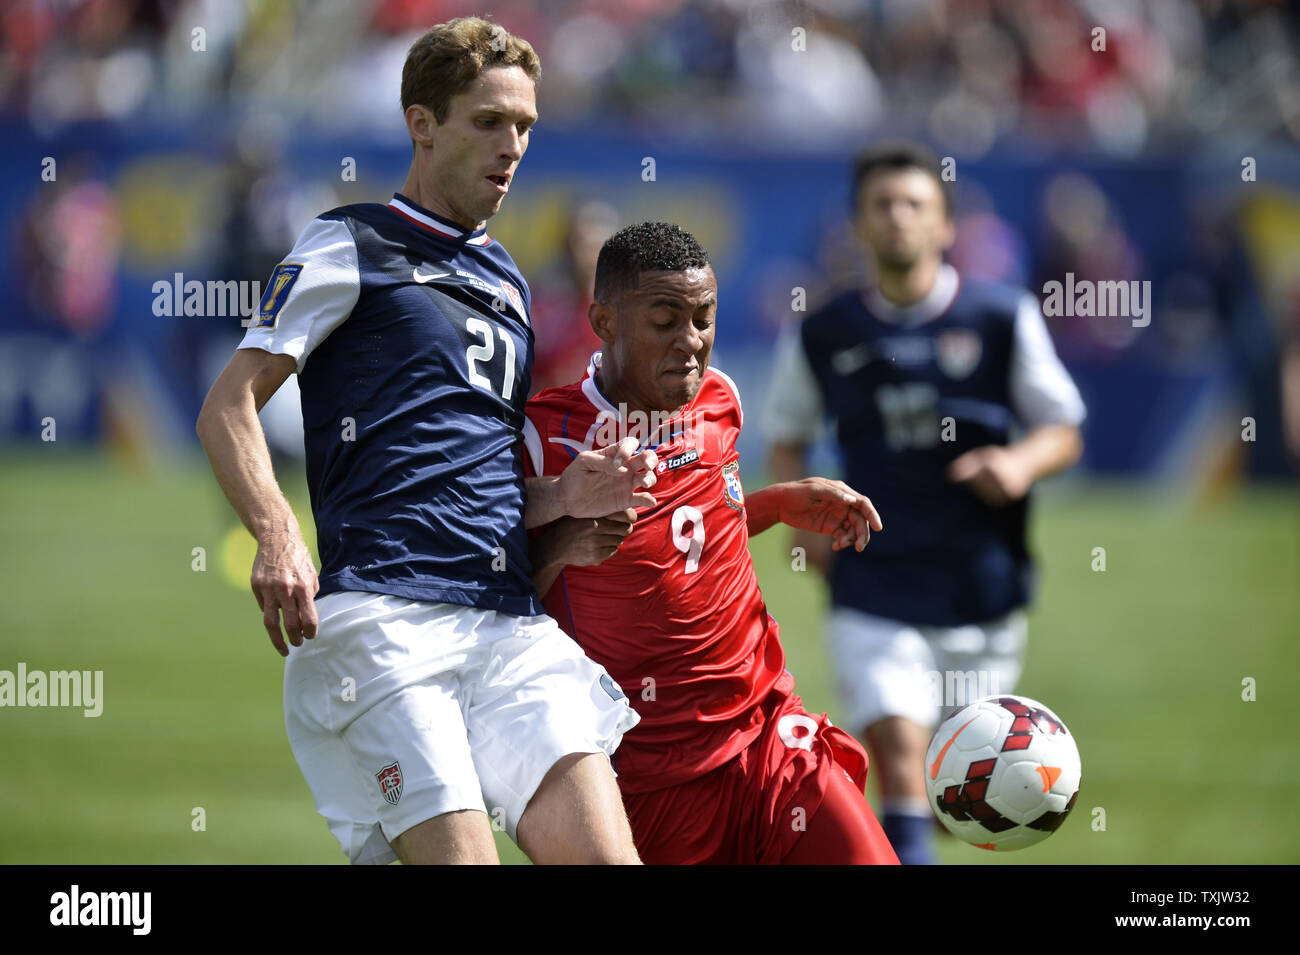 United States defender Clarence Goodson (L) and Panama forward Gabriel Torres go for the ball during the first half of the 2013 CONCACAF Gold Cup Final at Soldier Field in Chicago on July 28, 2013.     UPI/Brian Kersey Stock Photo